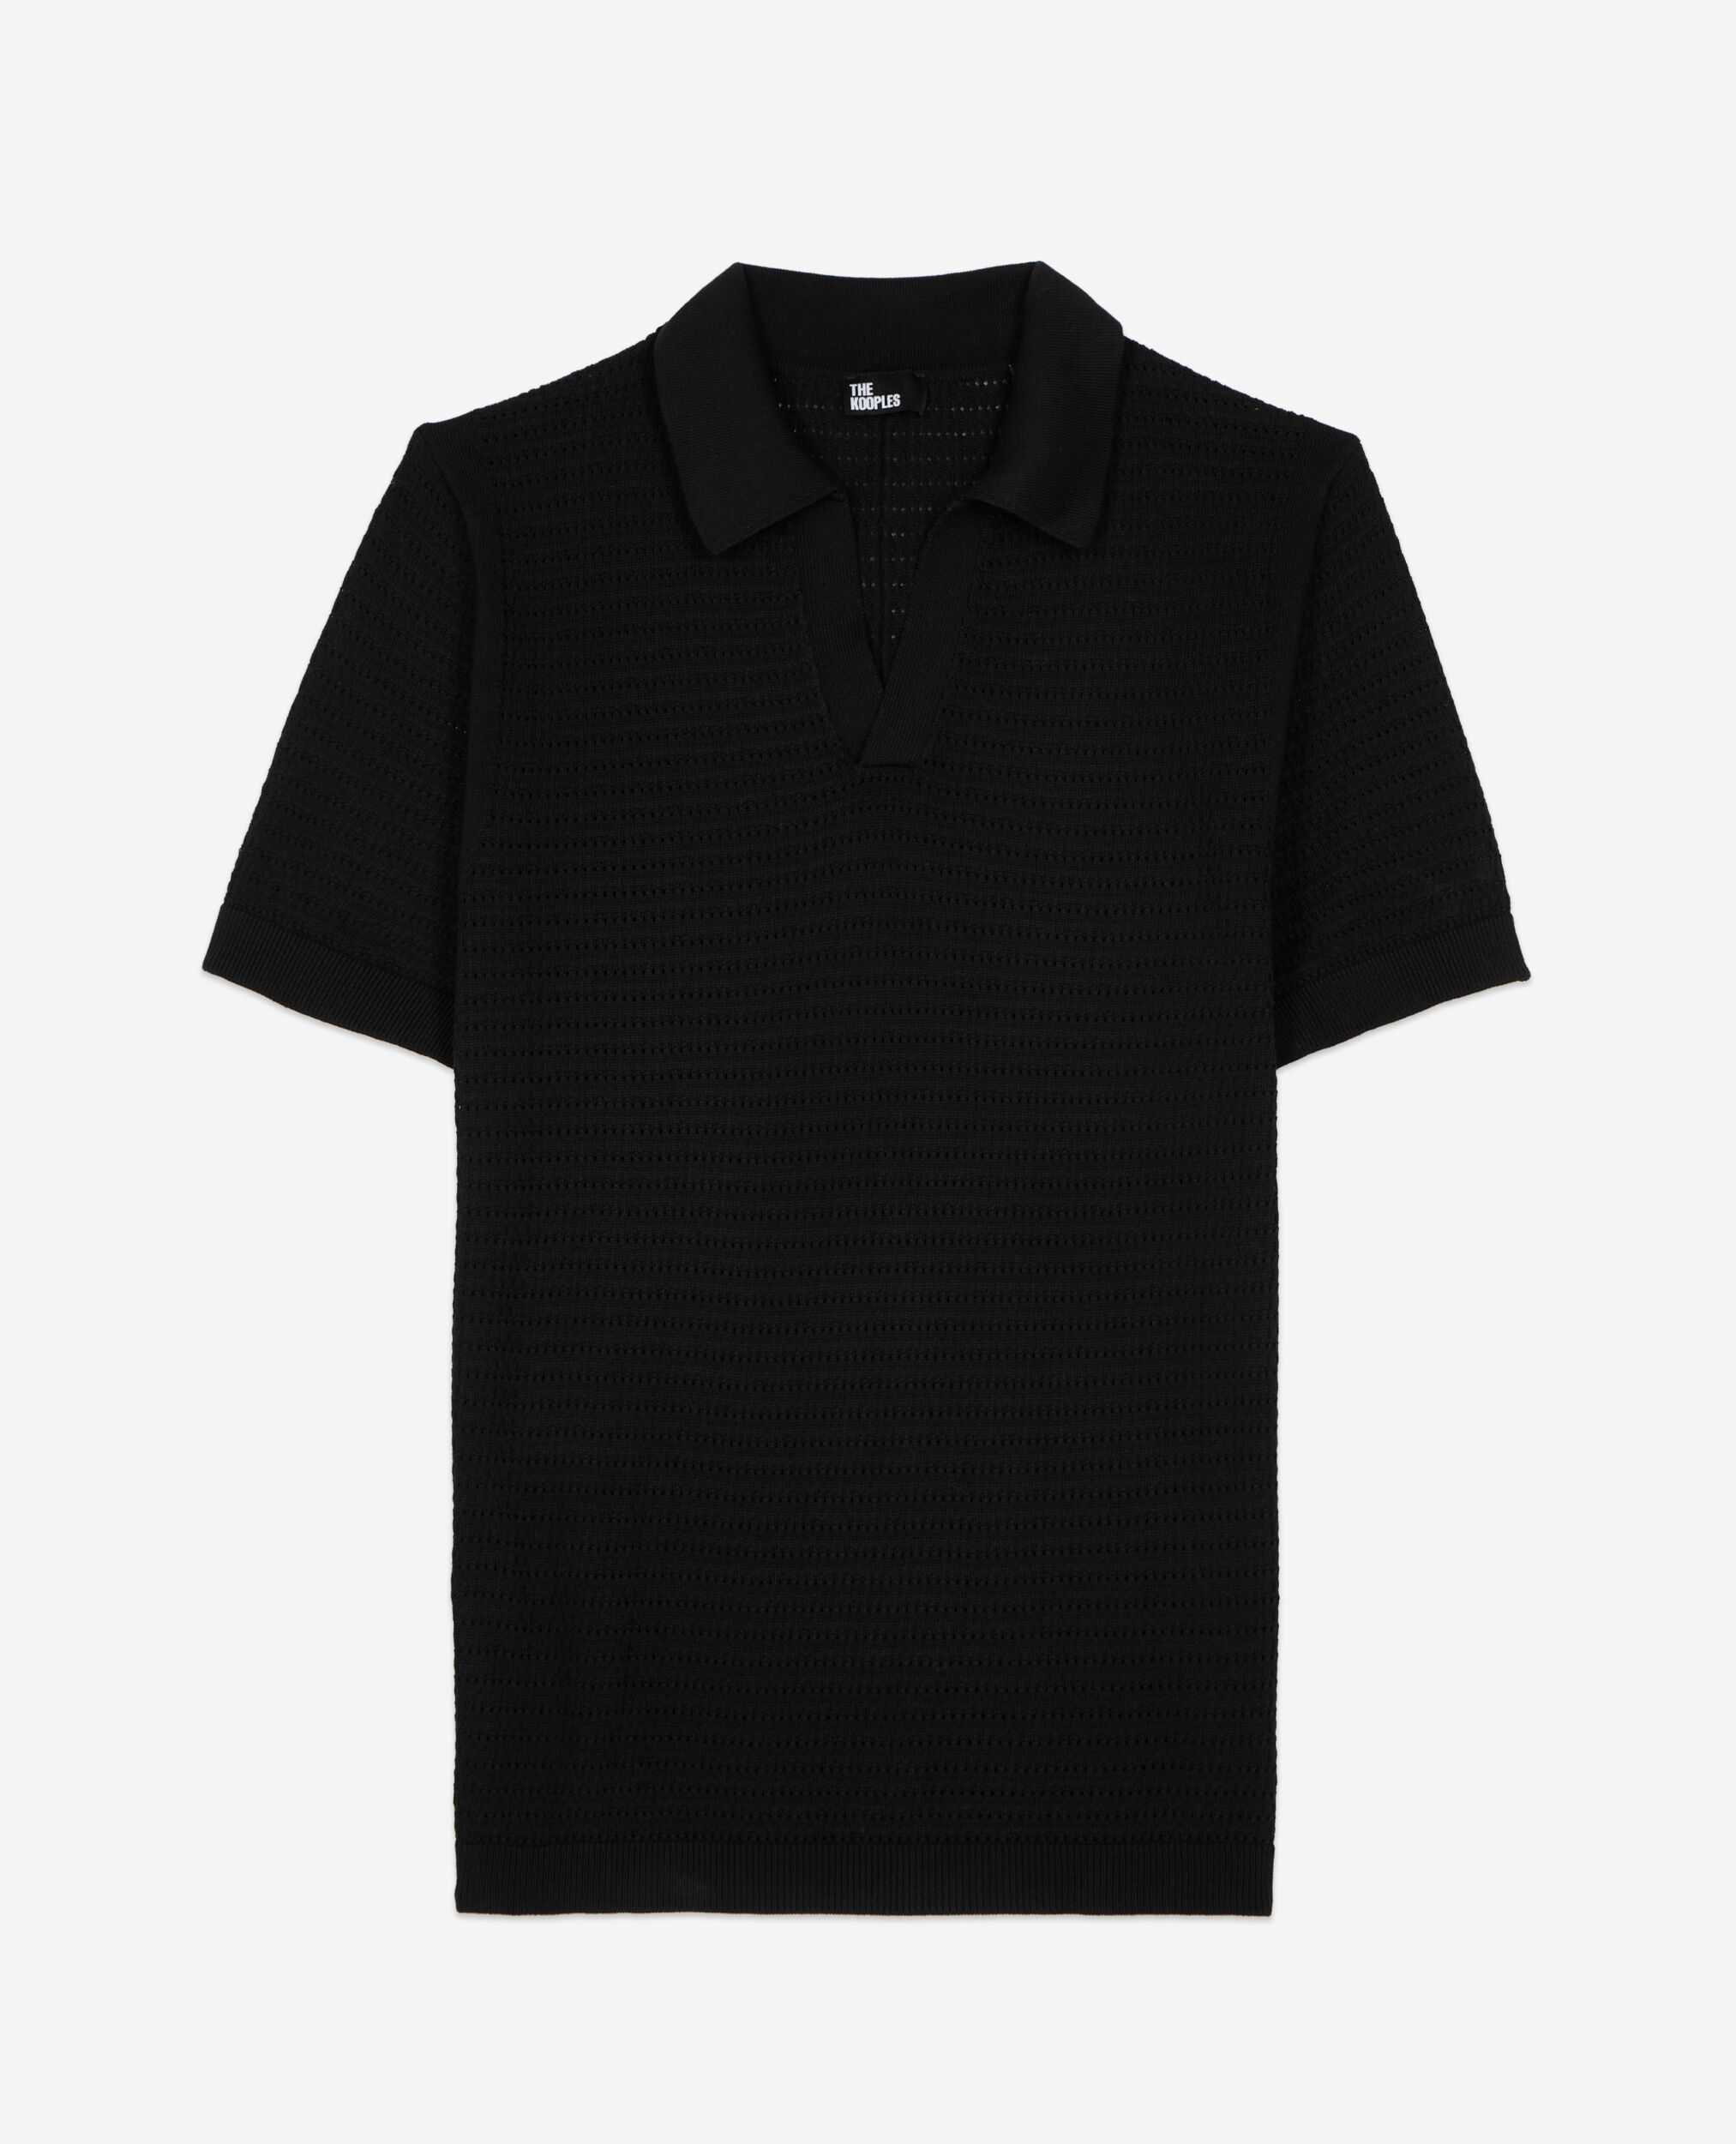 Black openwork knit polo t-shirt, BLACK, hi-res image number null